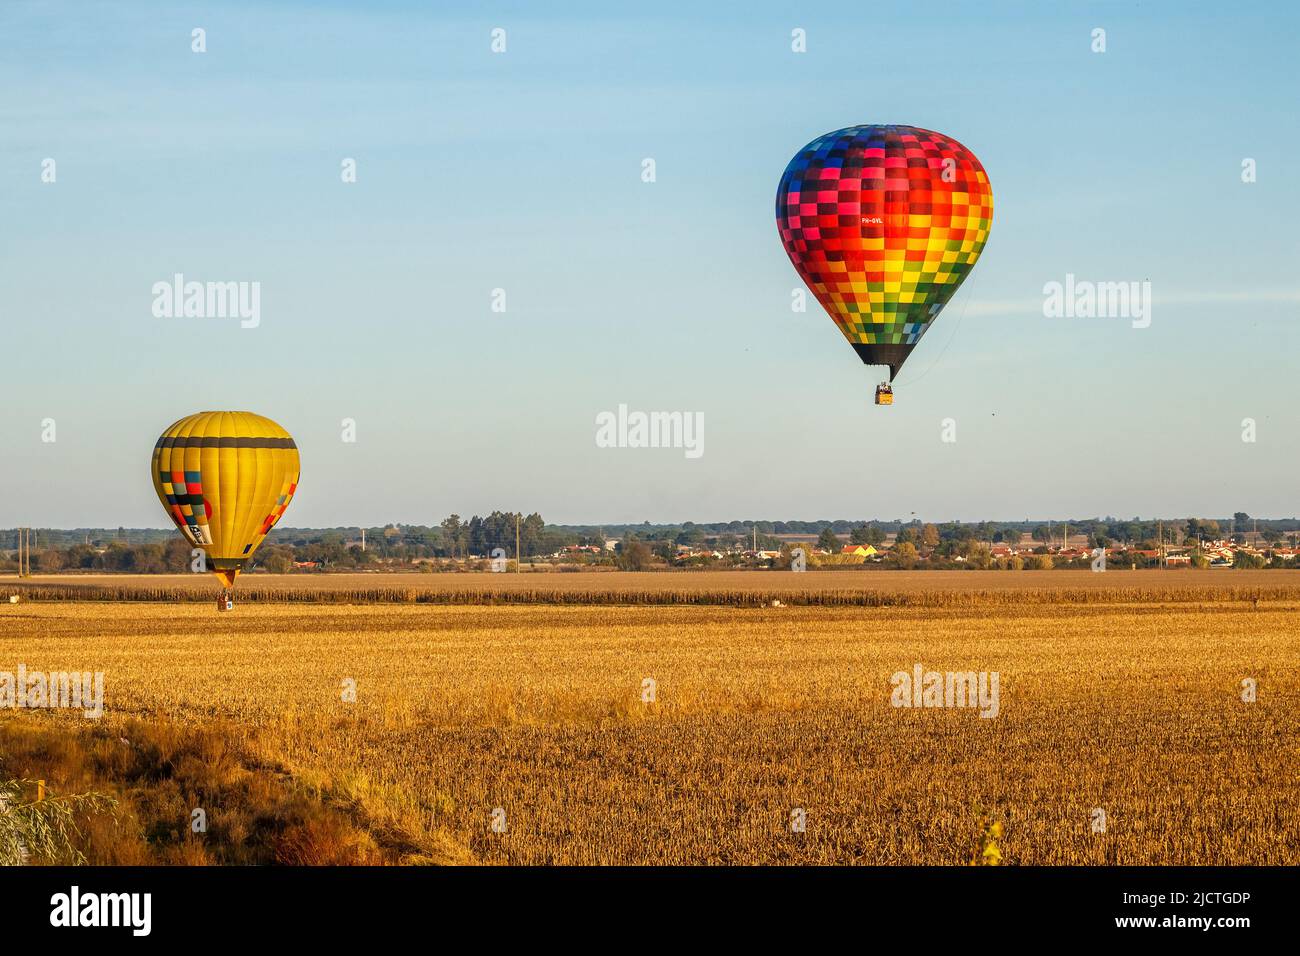 Coruche, Portugal - November 13, 2021: 2 Hot air balloons flying over the cornfields outside Coruche in Portugal, during the Ballooning Festival. Stock Photo